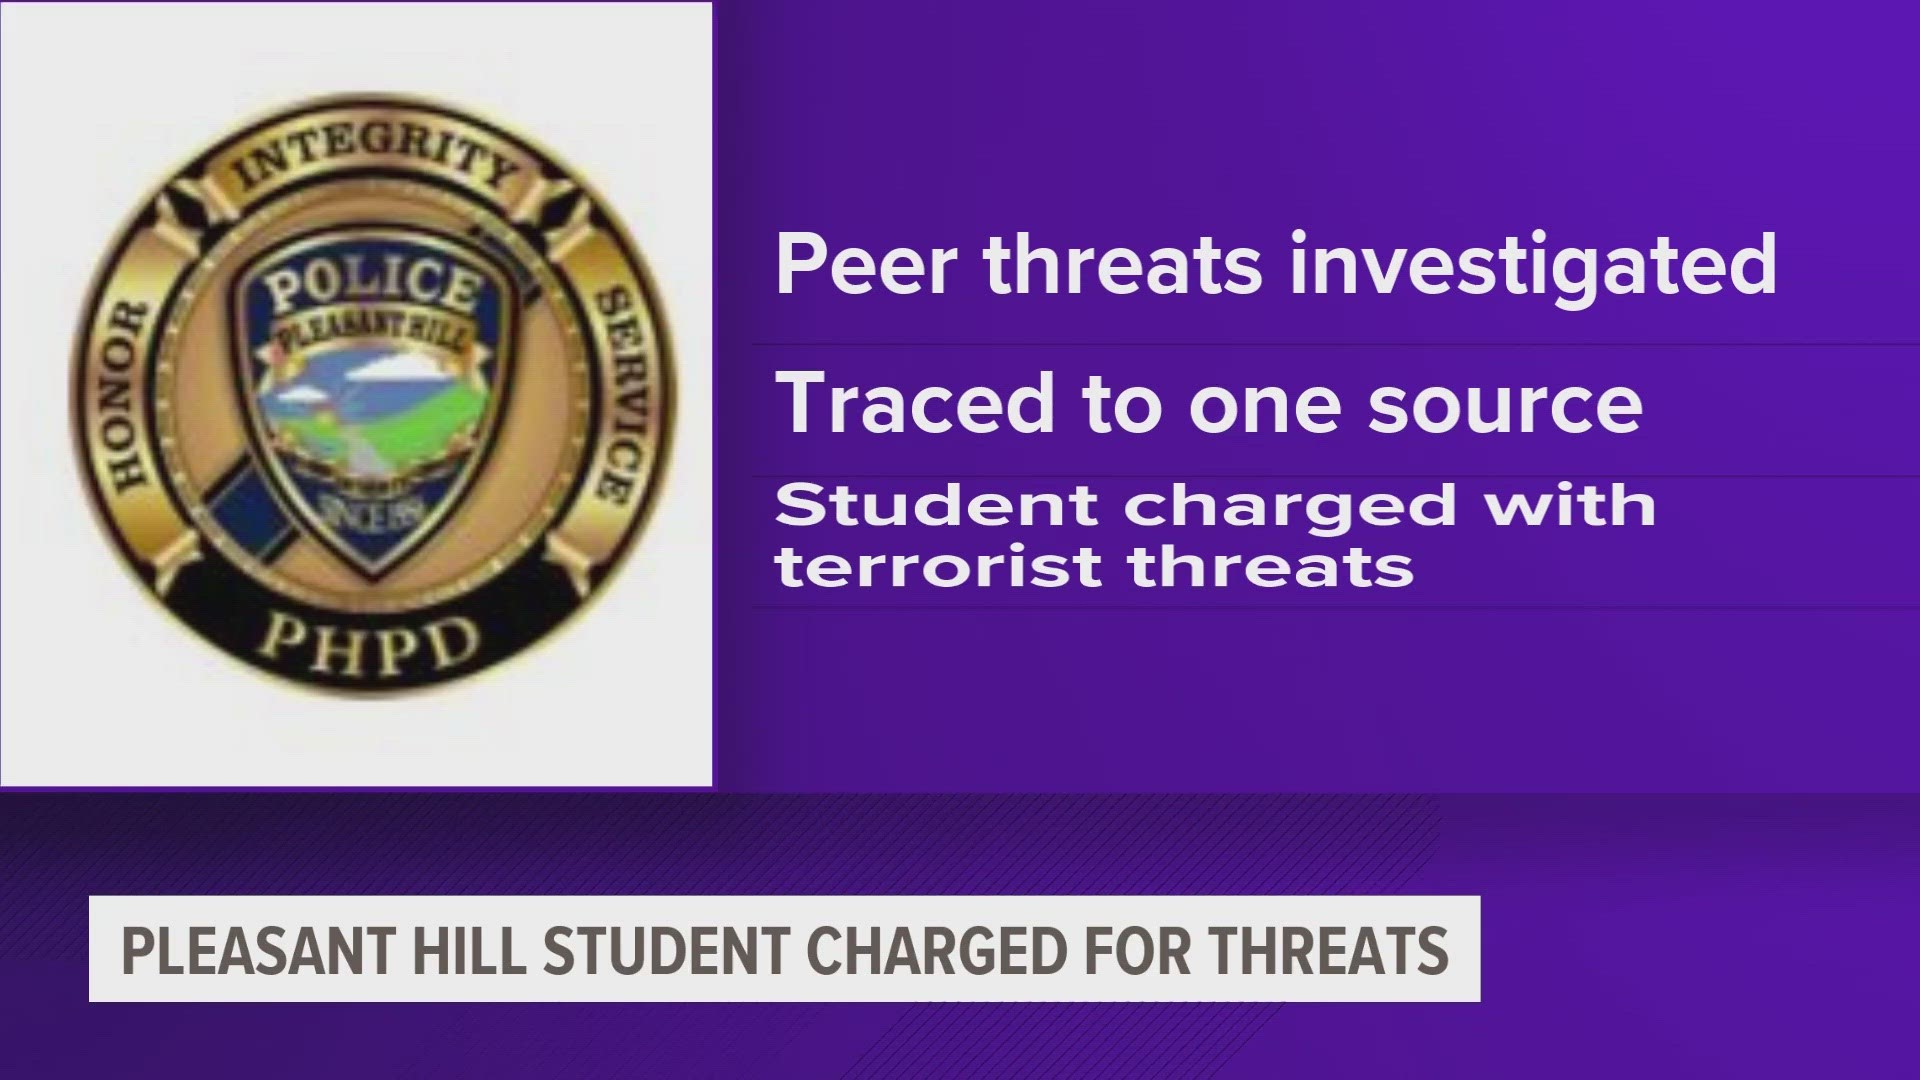 Police said the students' comments caused "concerns about their peers' safety."